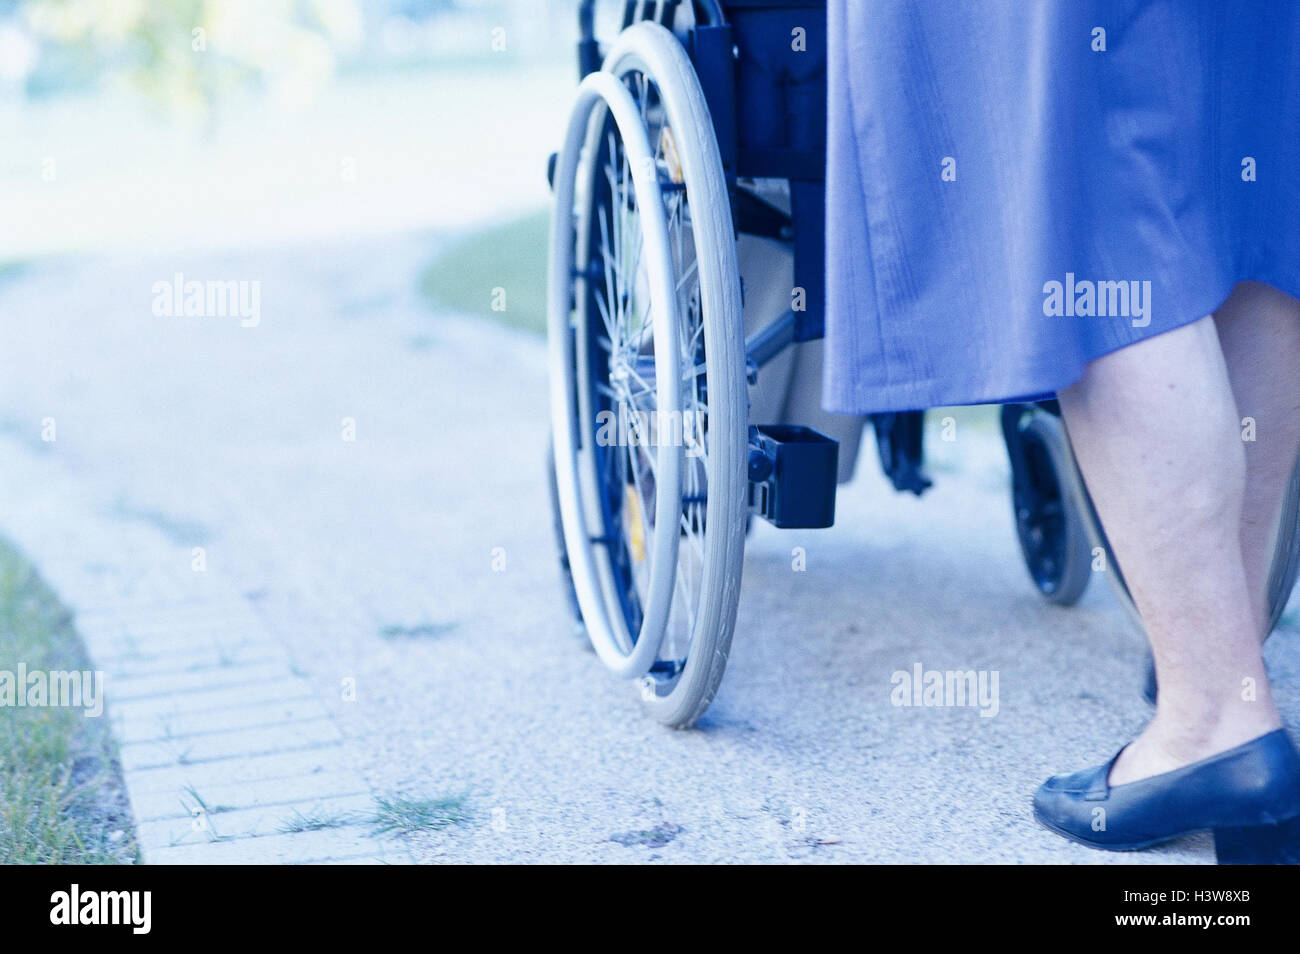 Senior, invalid, wheel chair, push, back view, detail, model released, woman, old, old person, pensioner, care, auxiliary readiness, help, help, maintain, look after, concern, care, in need care, geriatric care, walk, excursion, outside, very close Stock Photo